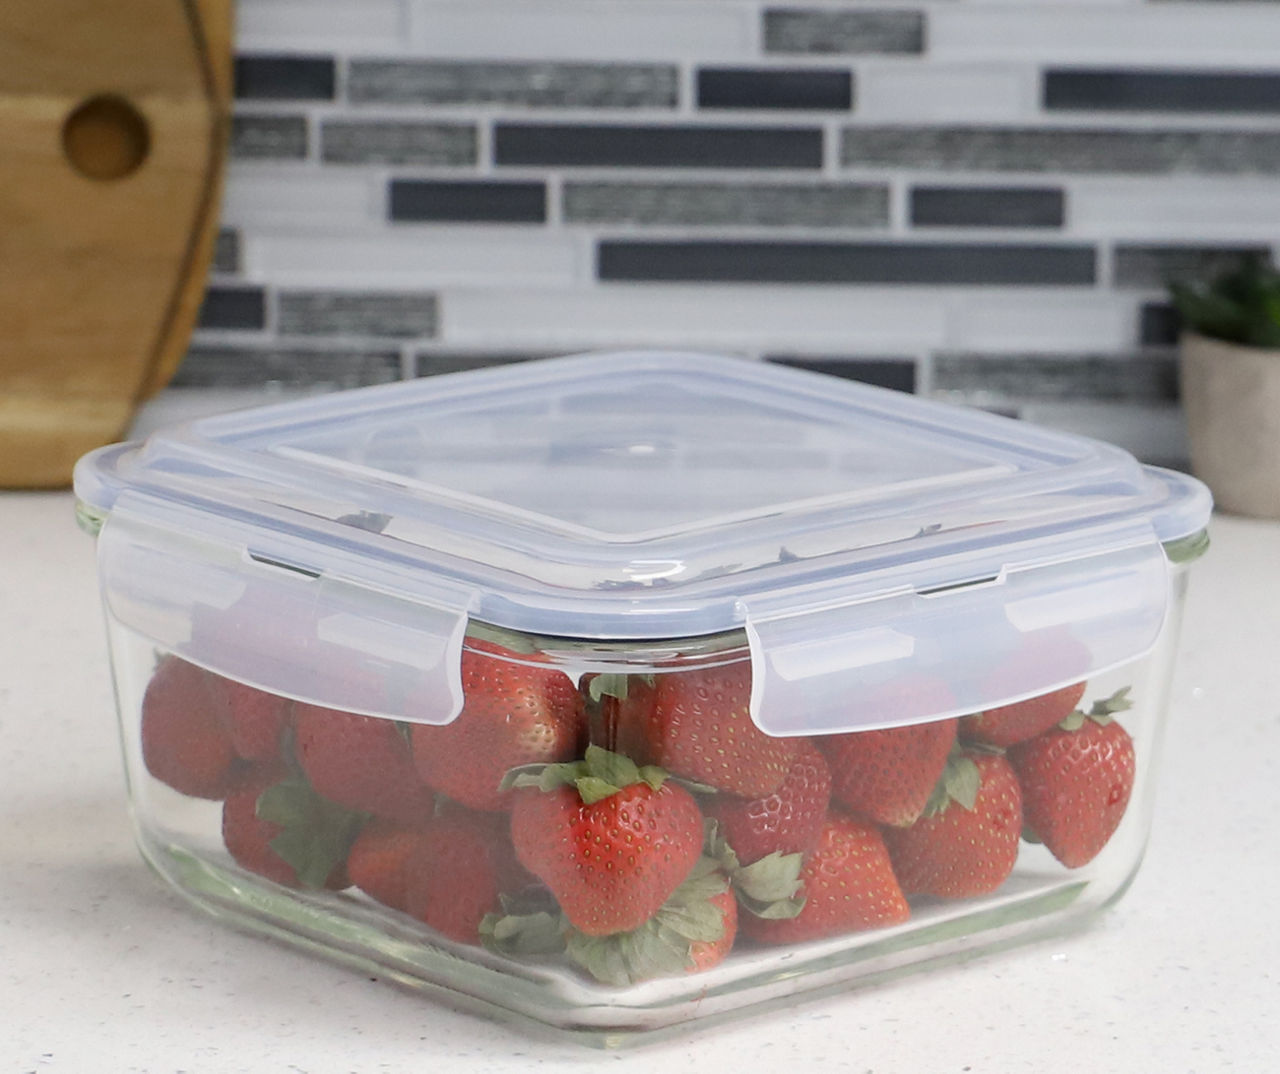 Deal Alert: This 18-piece glass container set is 57 percent off